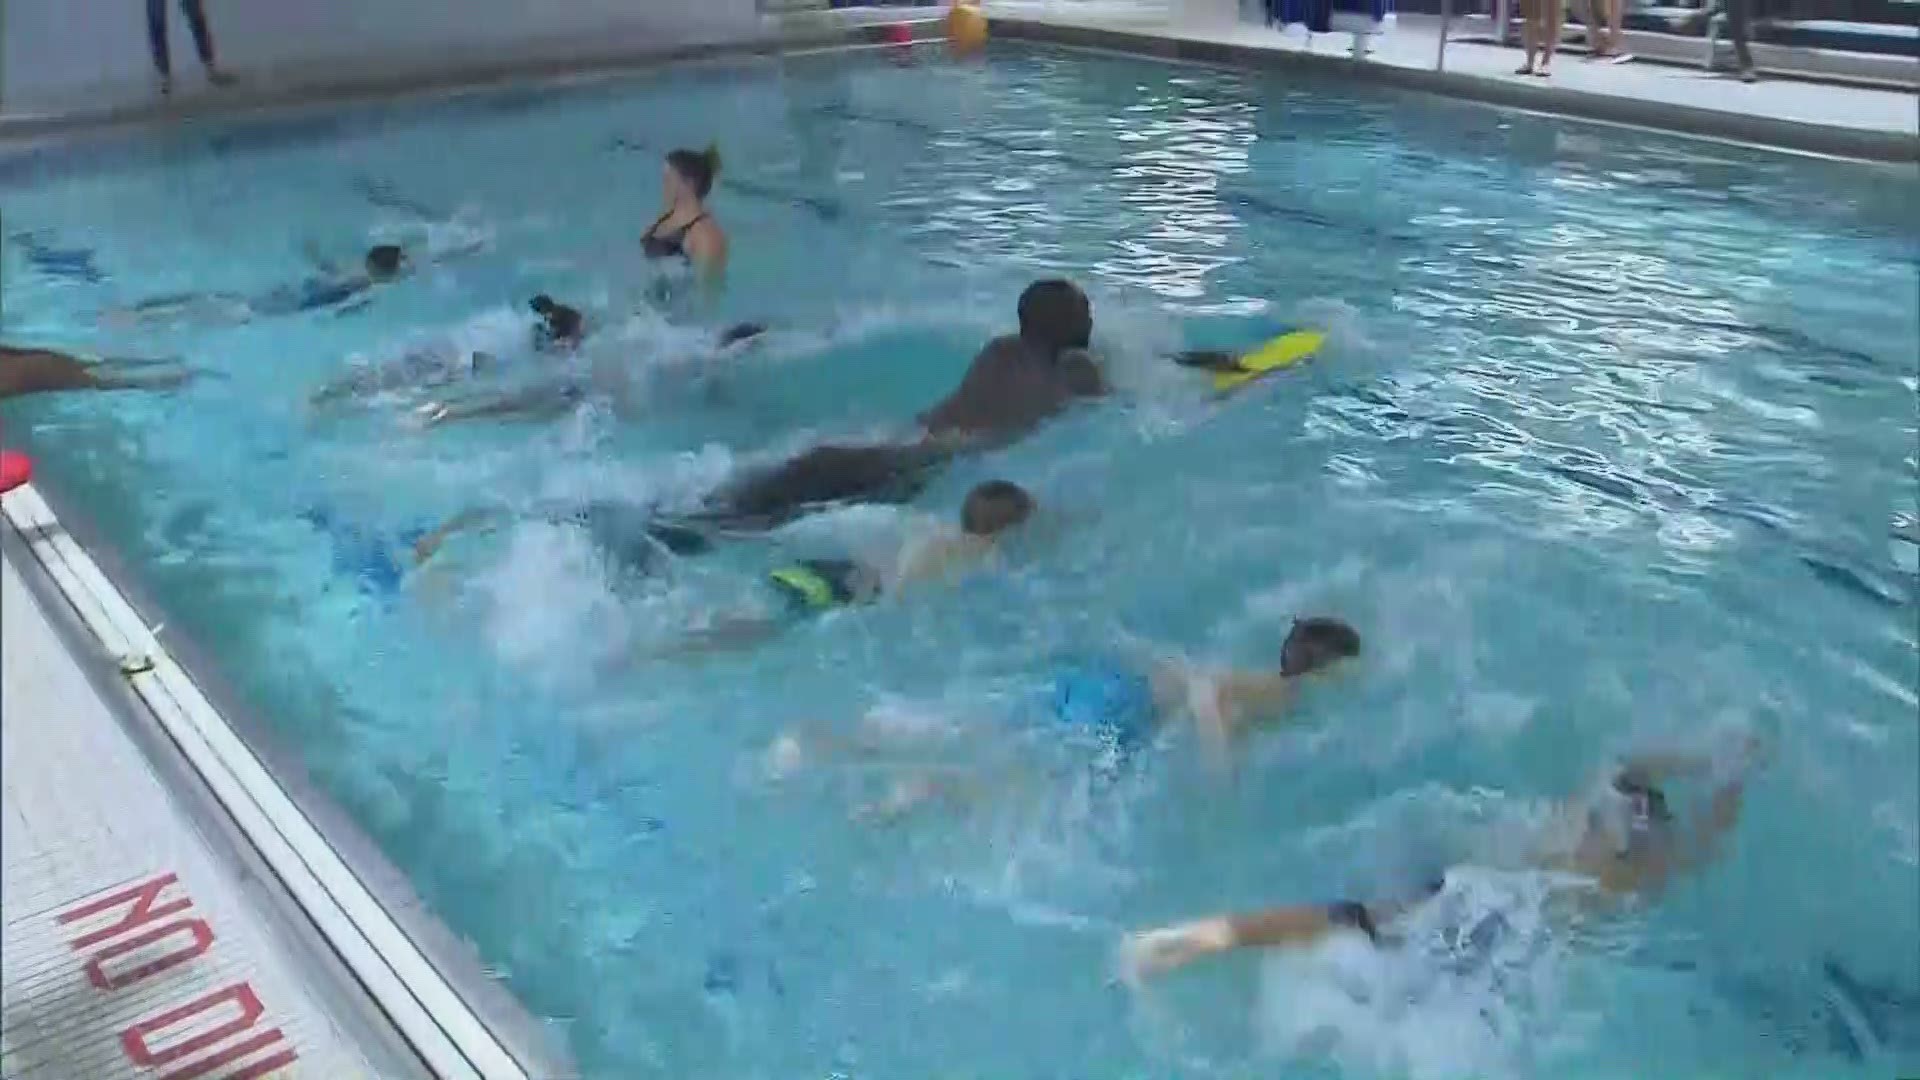 Celtics center Tacko Fall looks like a whale among guppies as he takes swimming lessons with a class of children.